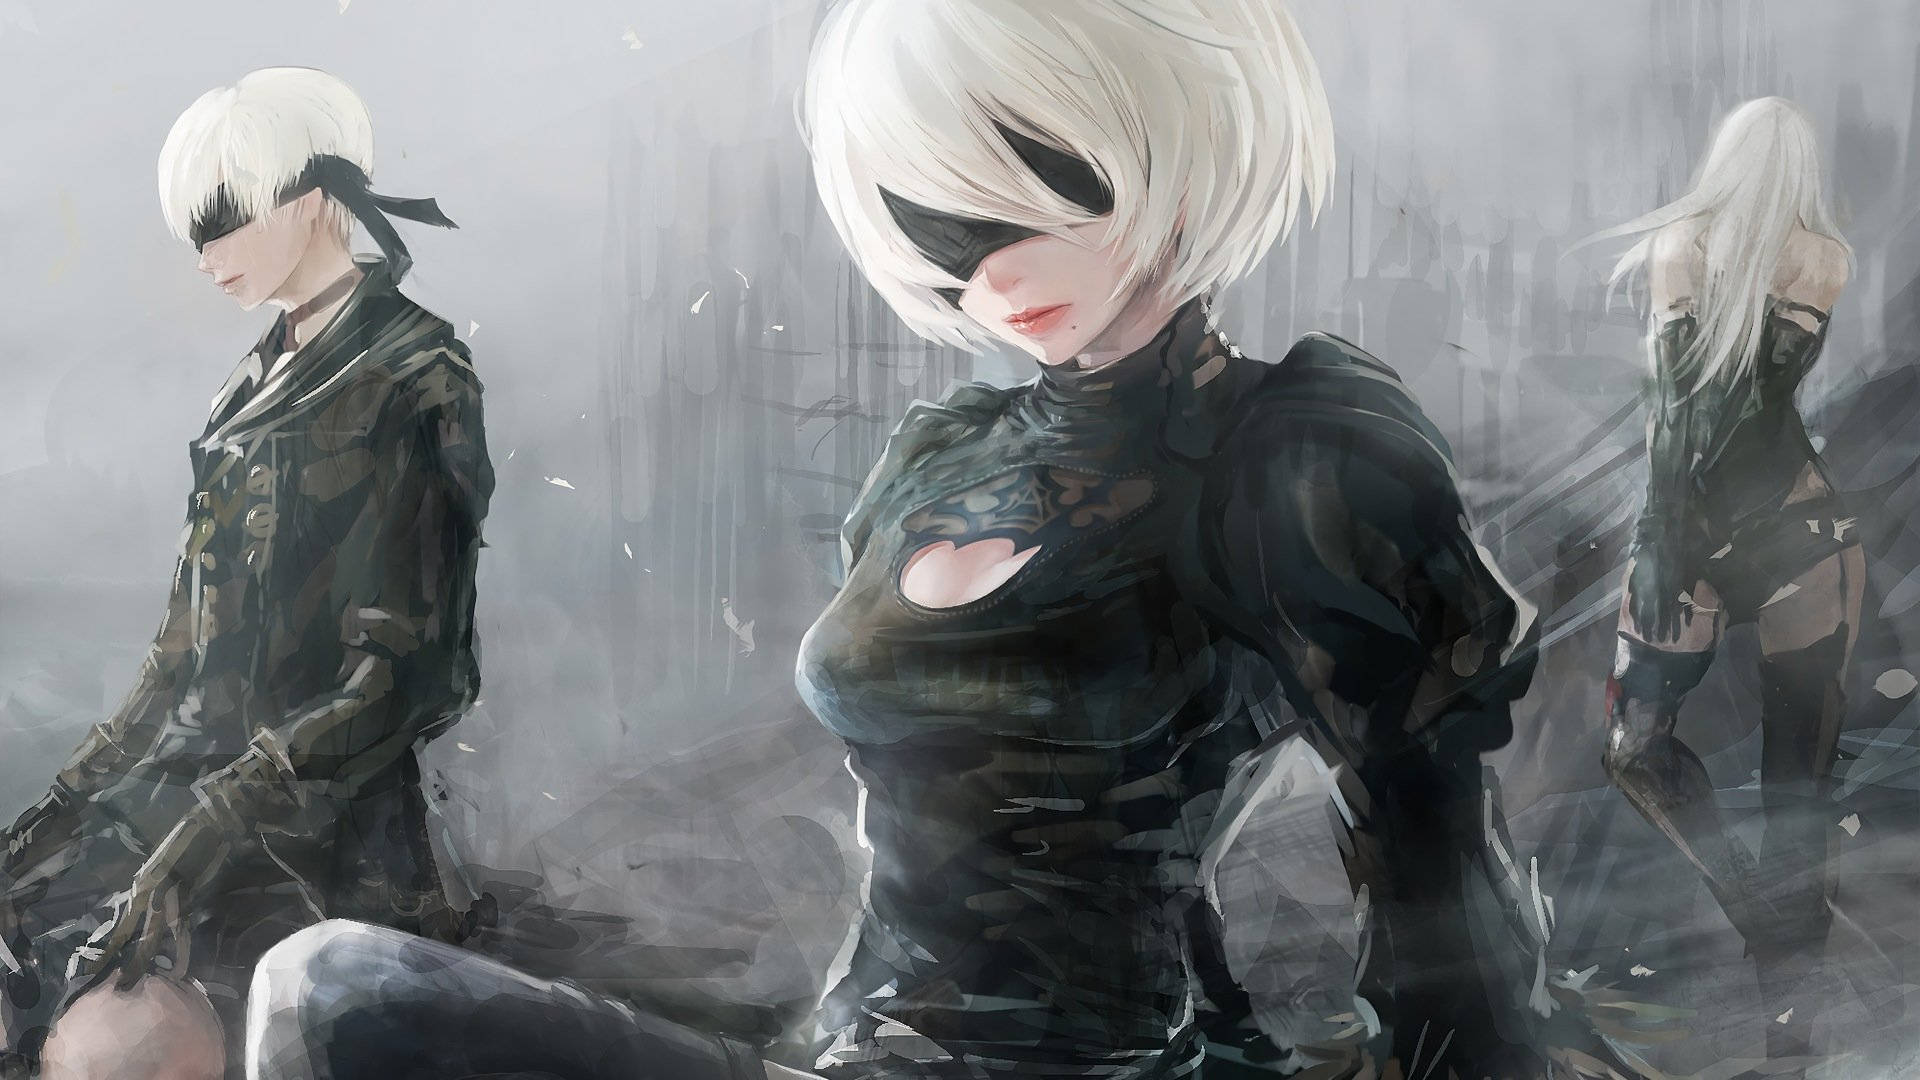 Experience breathtaking action and poignant storytelling with NieR:Automata Wallpaper